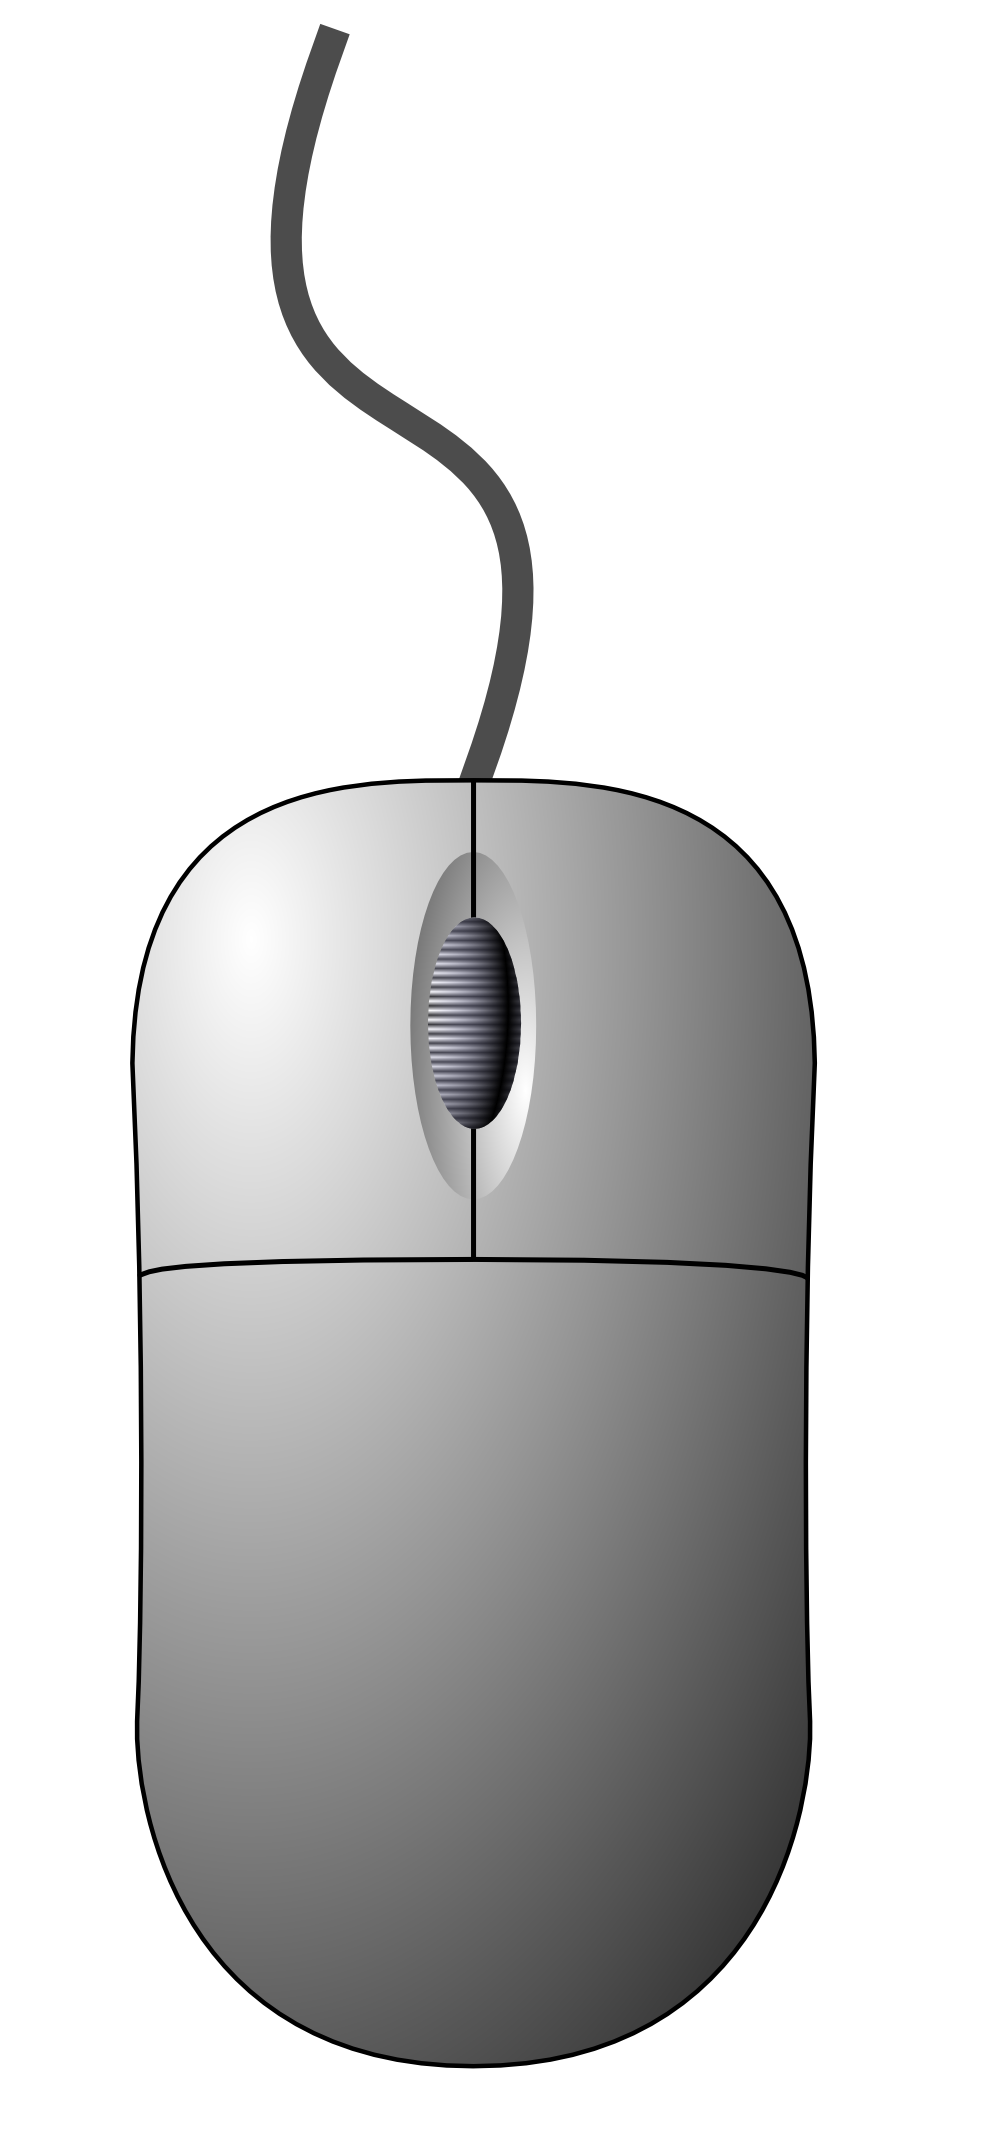 Computer Mouse Top View